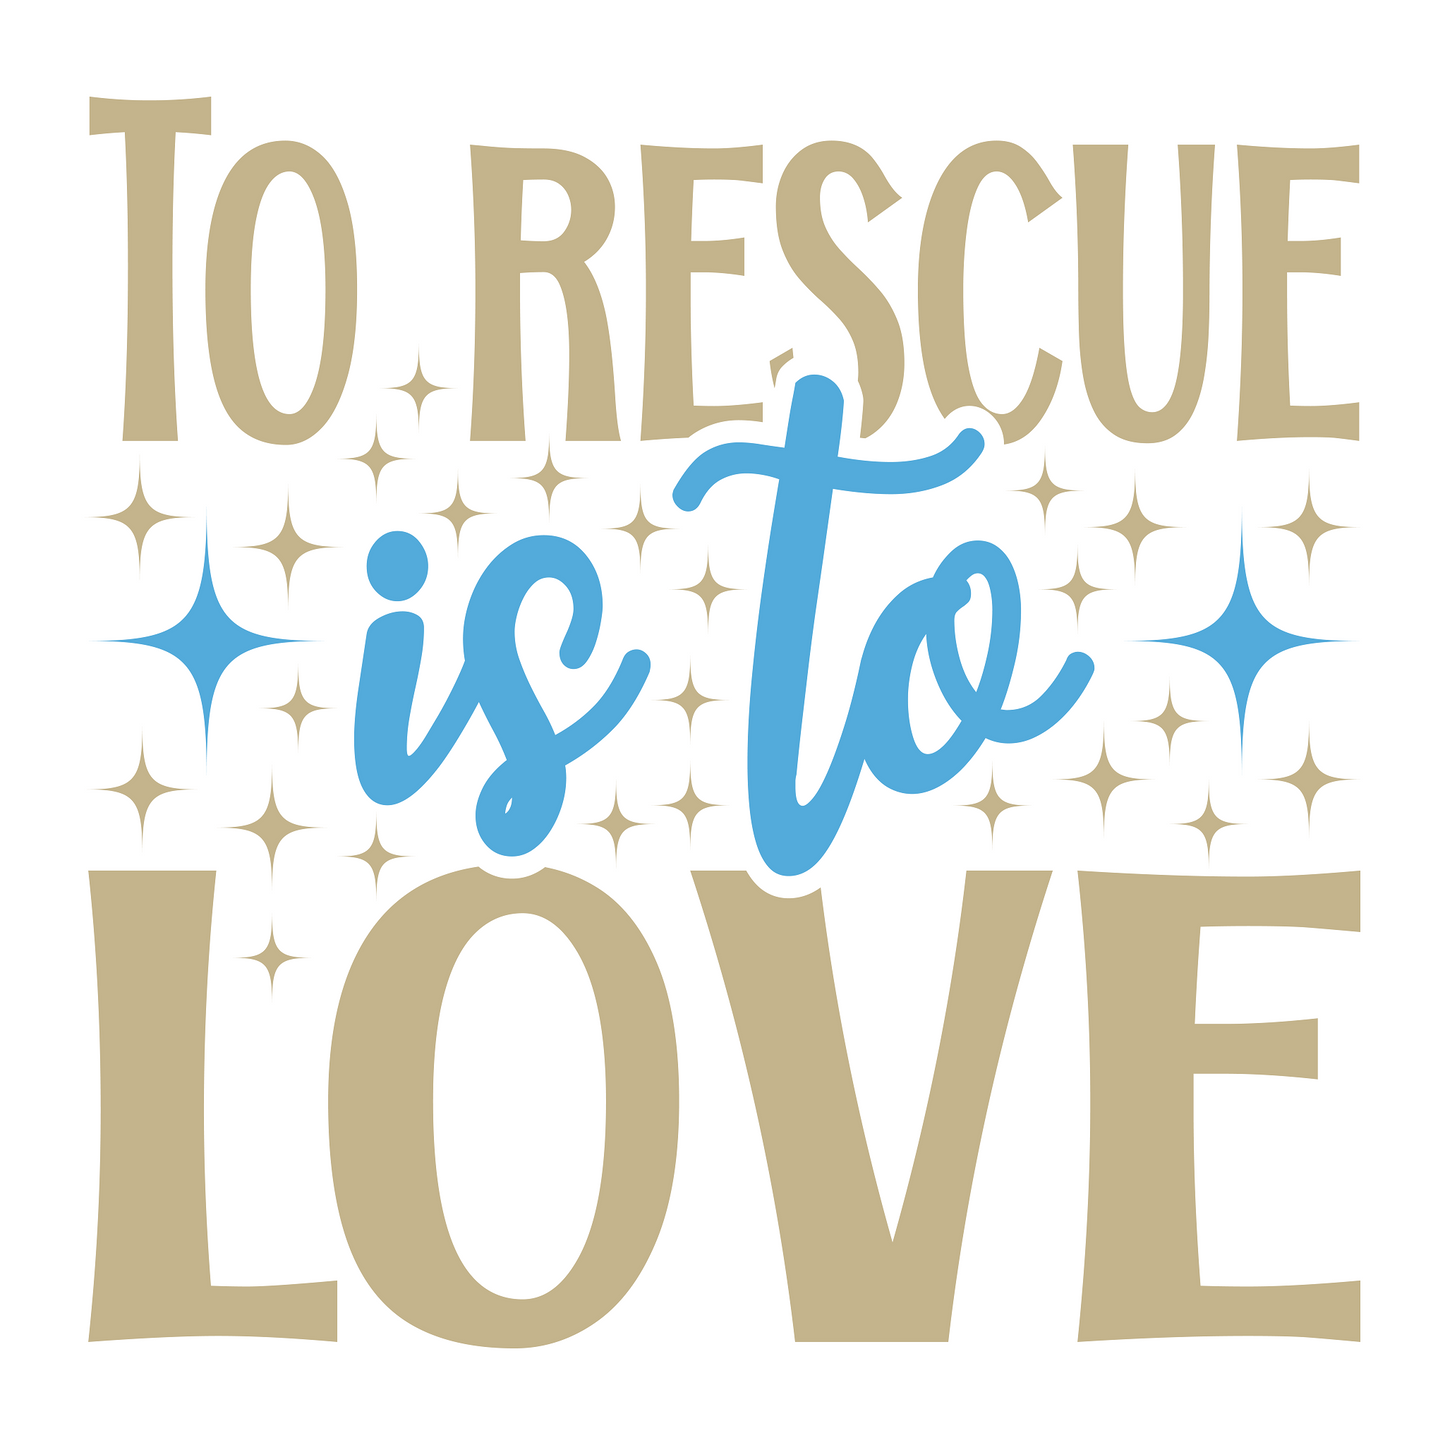 Inspirational Quote To Rescue Is To Love Motivational Sticker Vinyl Decal Motivation Stickers- 5" Vinyl Sticker Waterproof